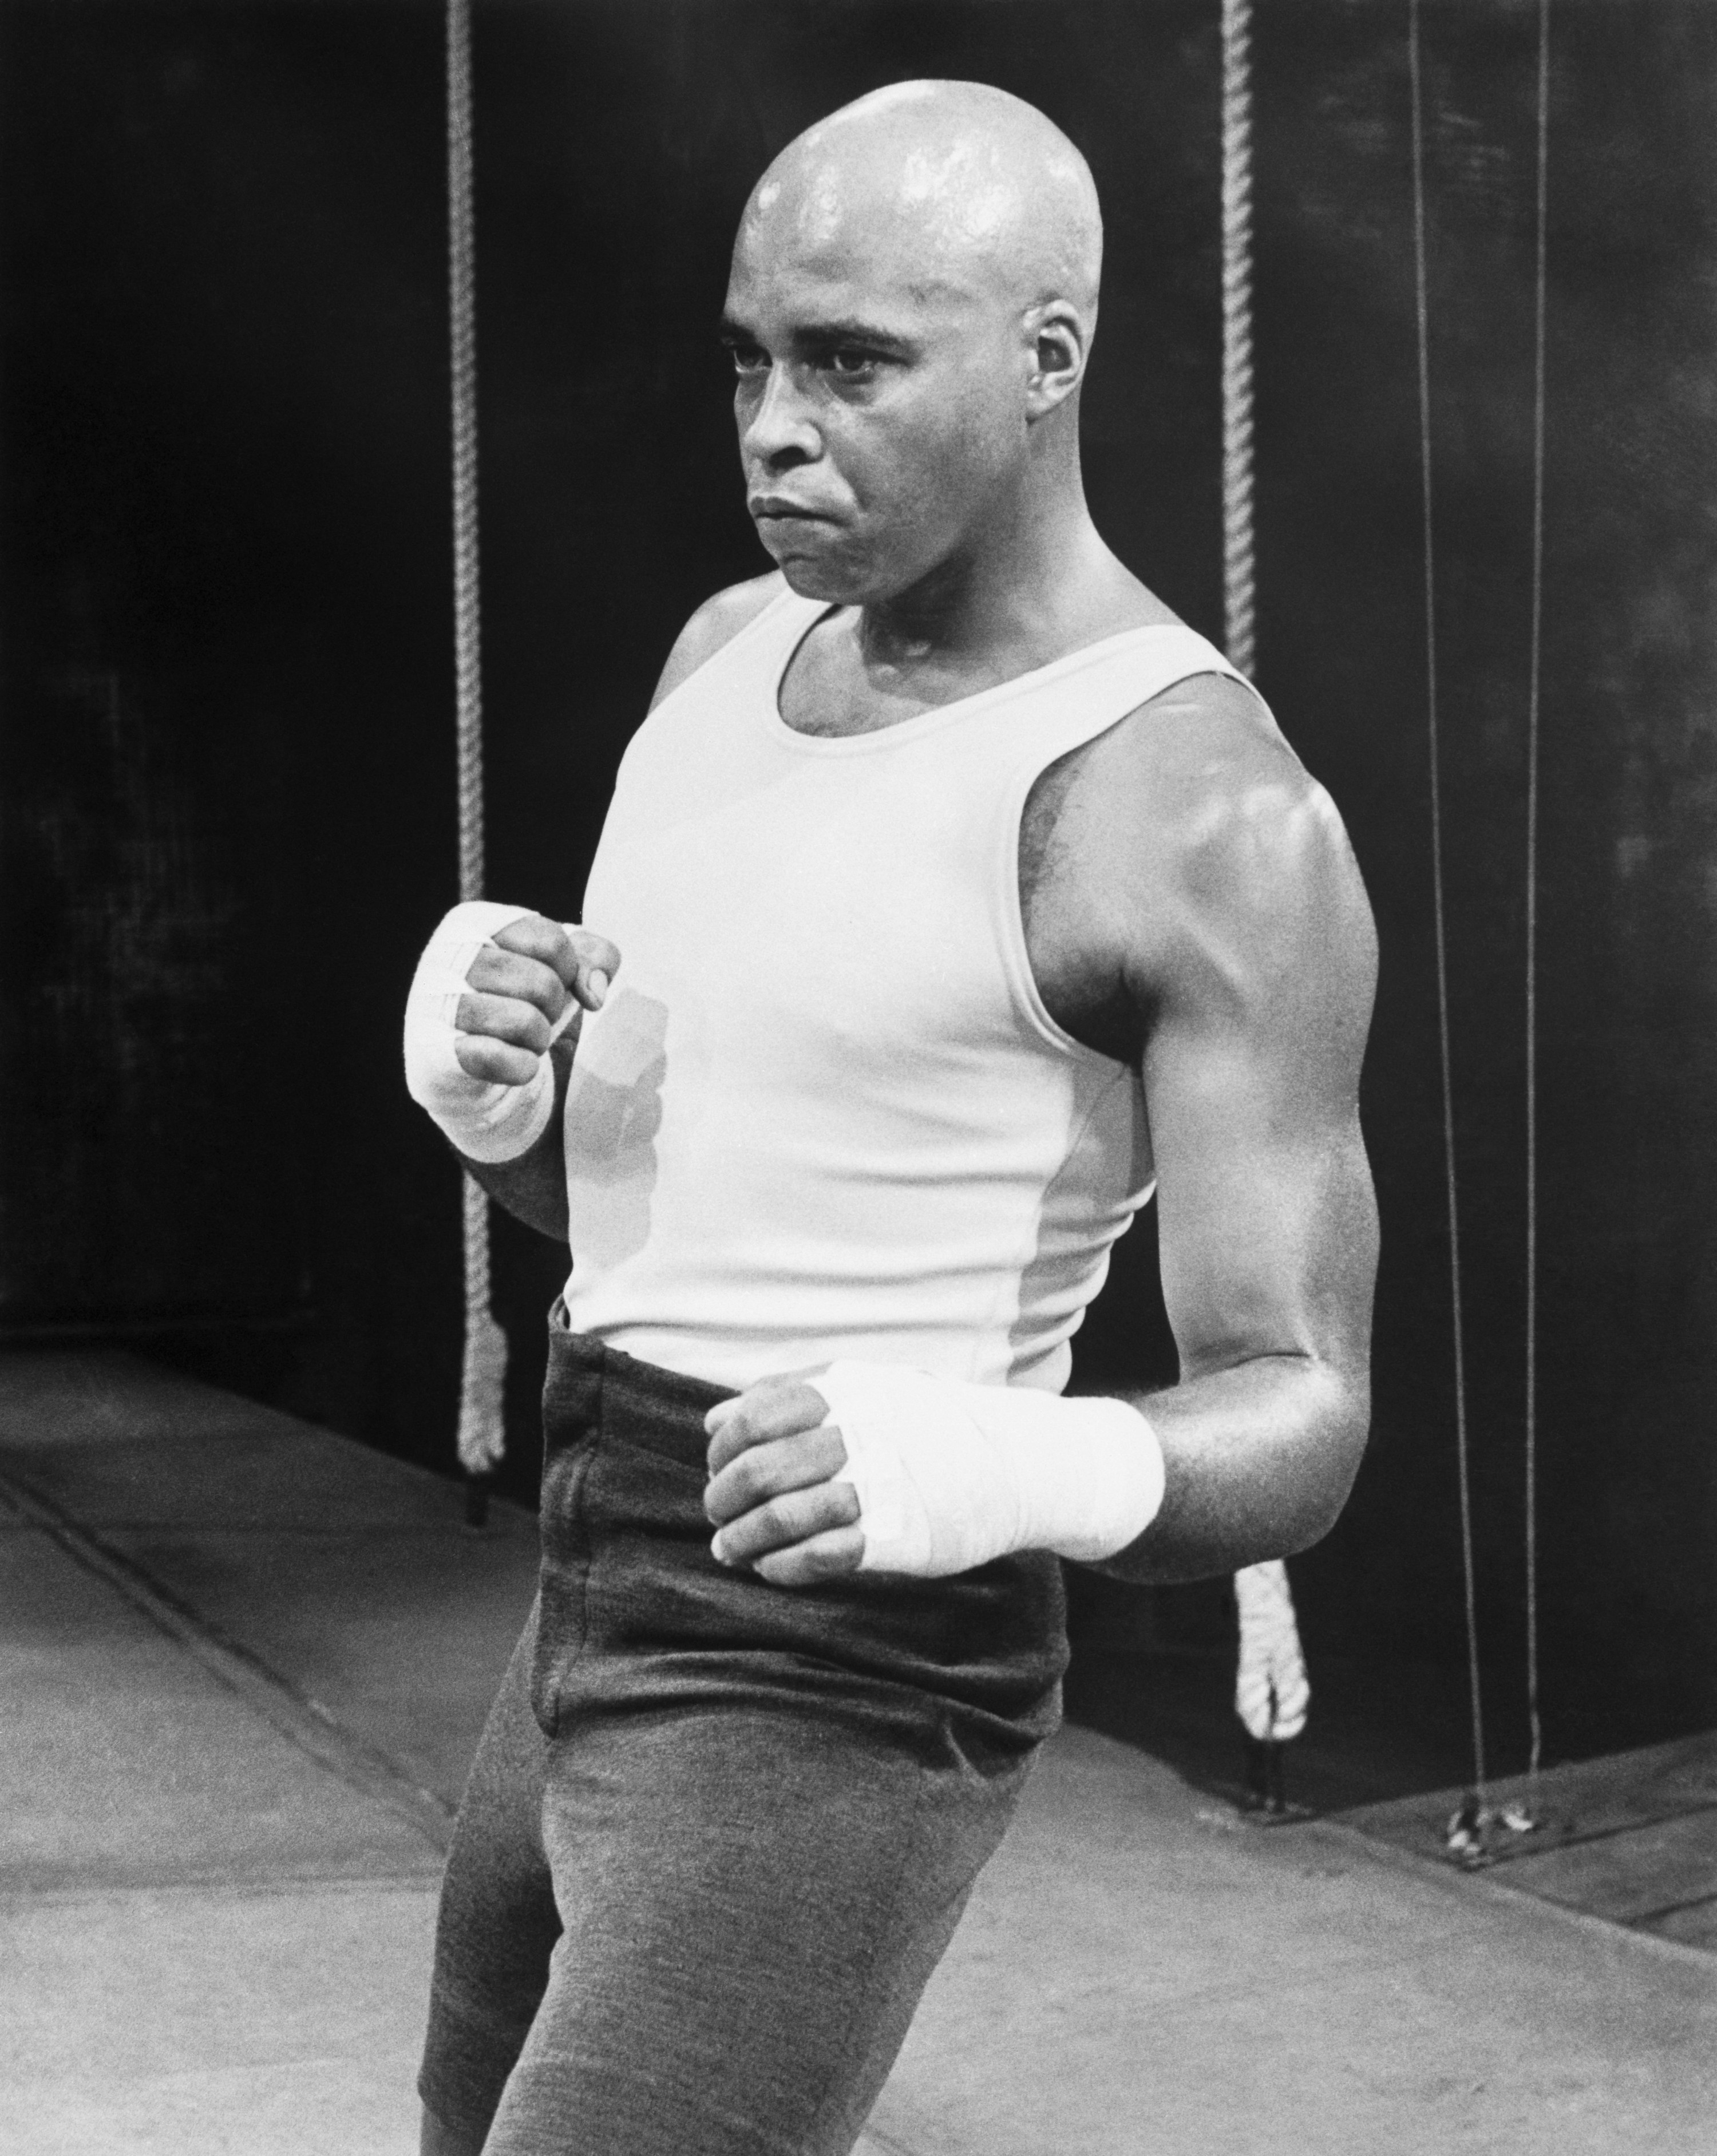 young James Earl Jones working out